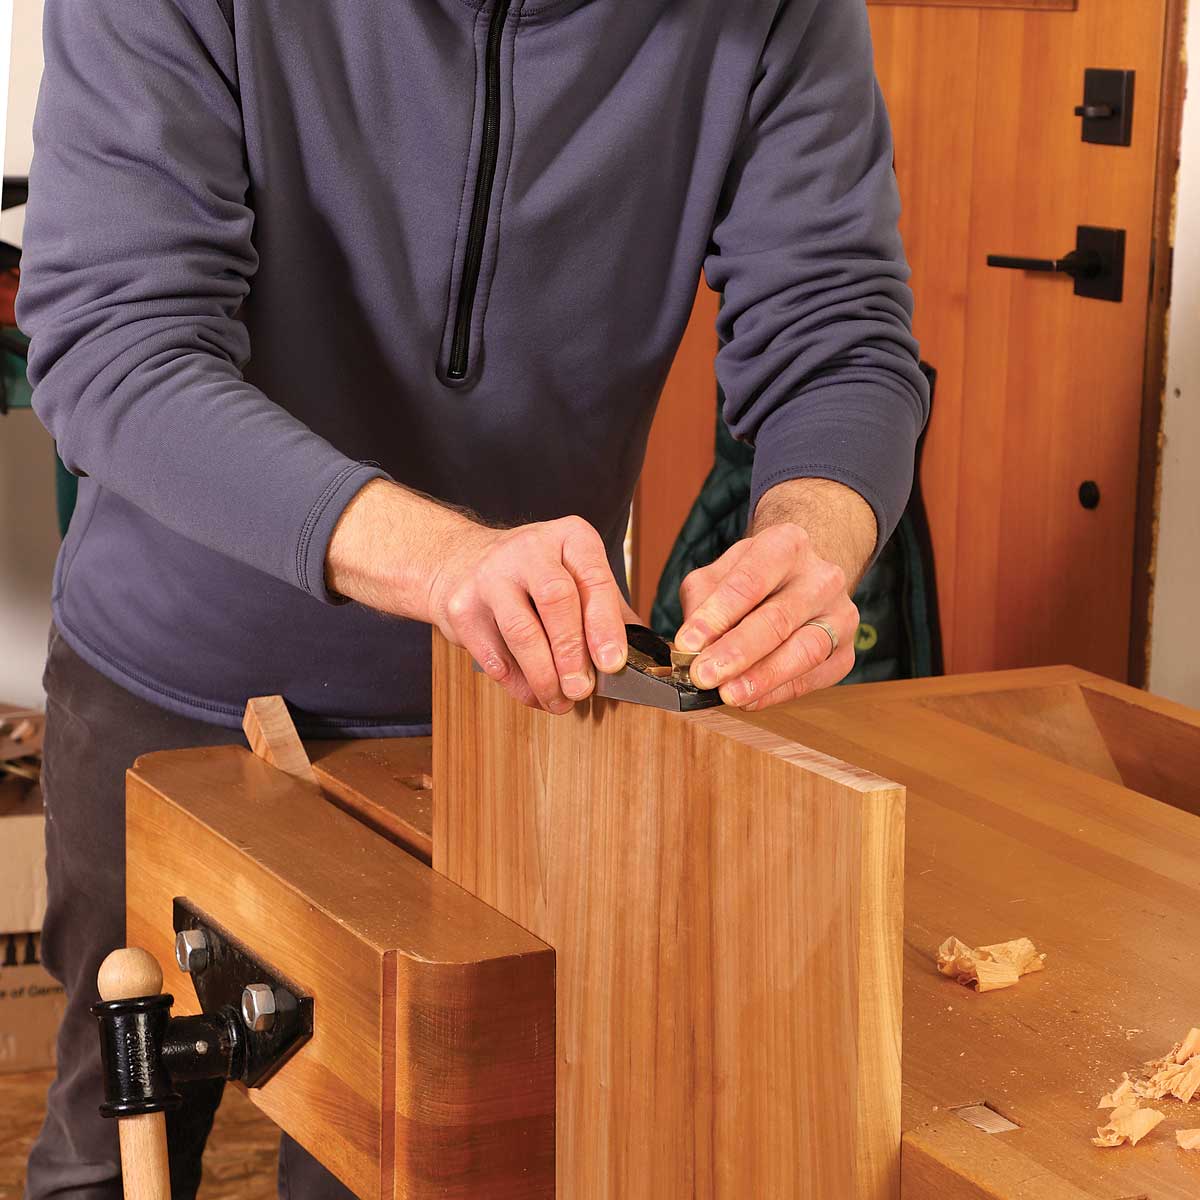 Use a vise for a wide board. When planing the end grain of wide boards like this one, Korsak fixes them in a vise.